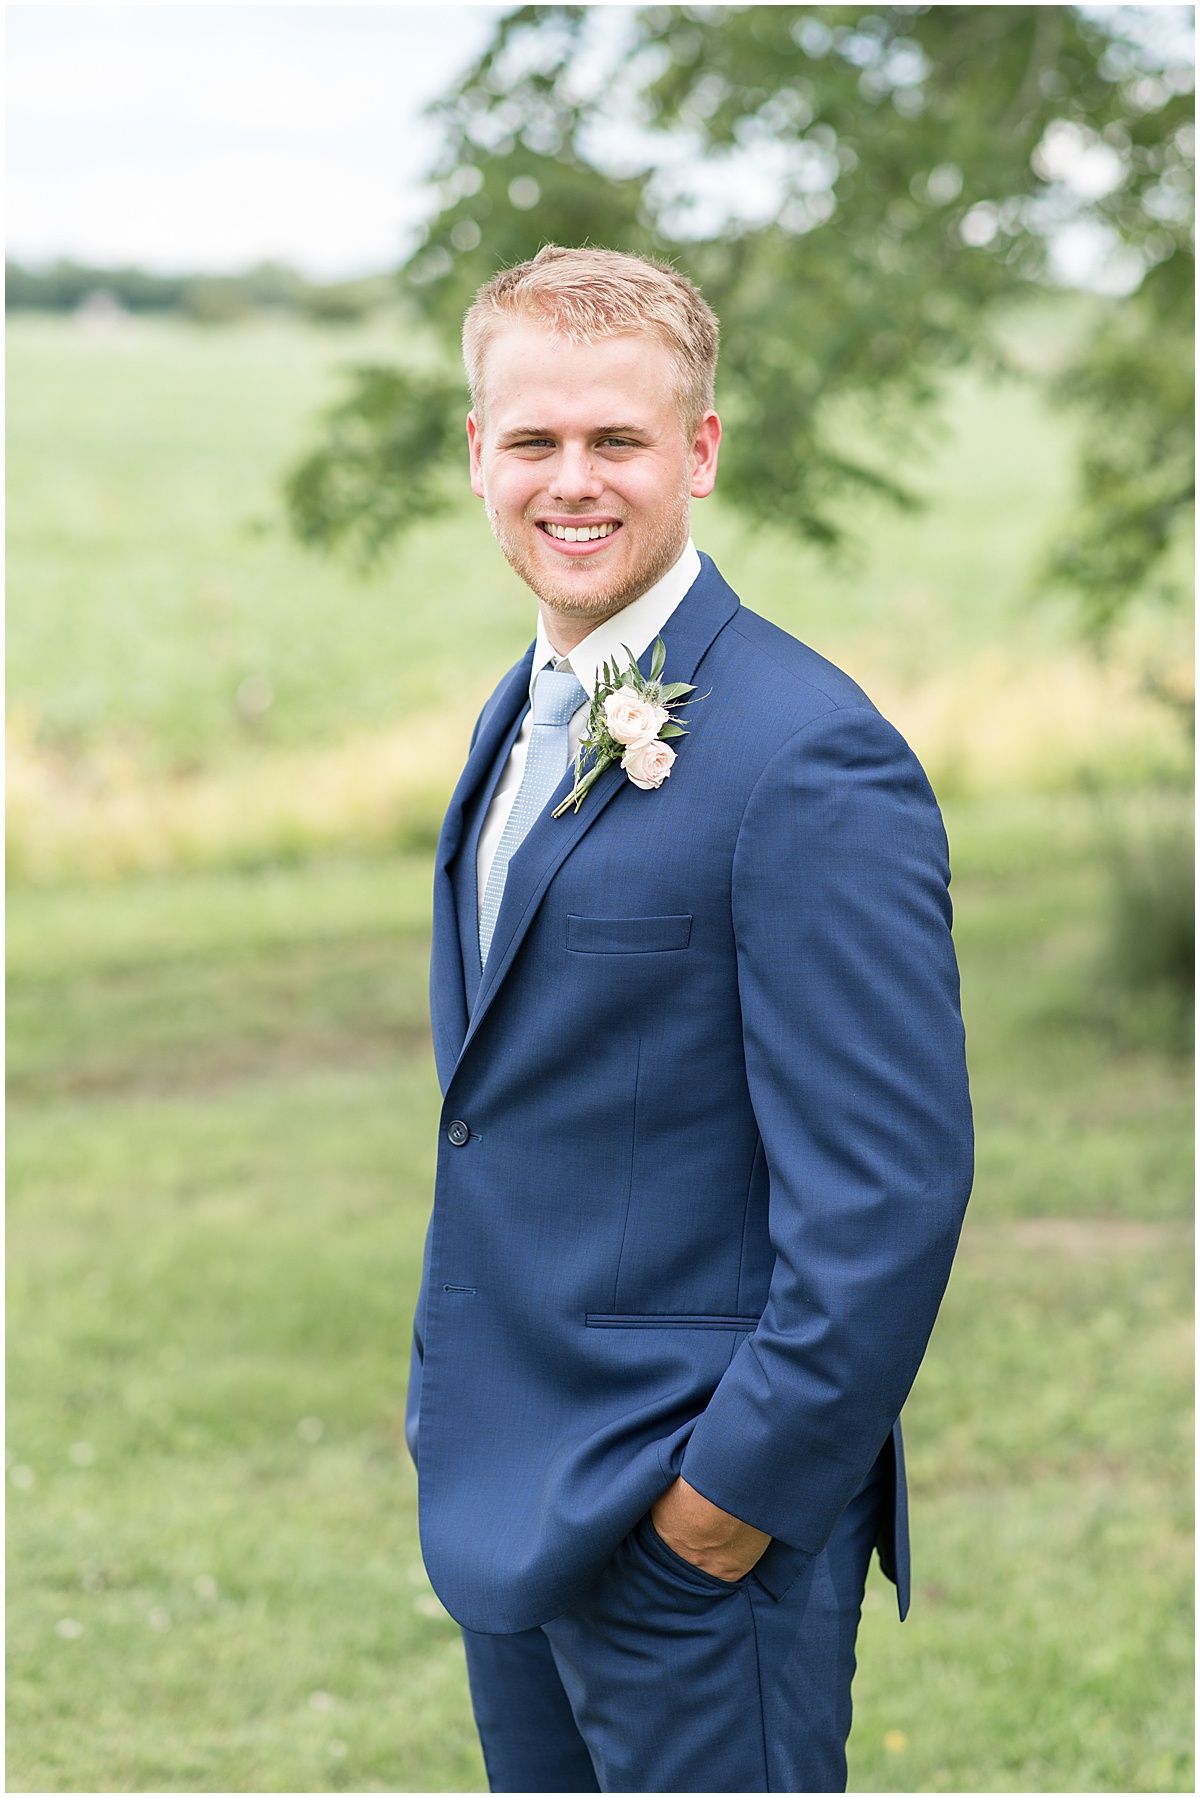 Groom Portraits at The Blessing Barn in Lafayette, Indiana